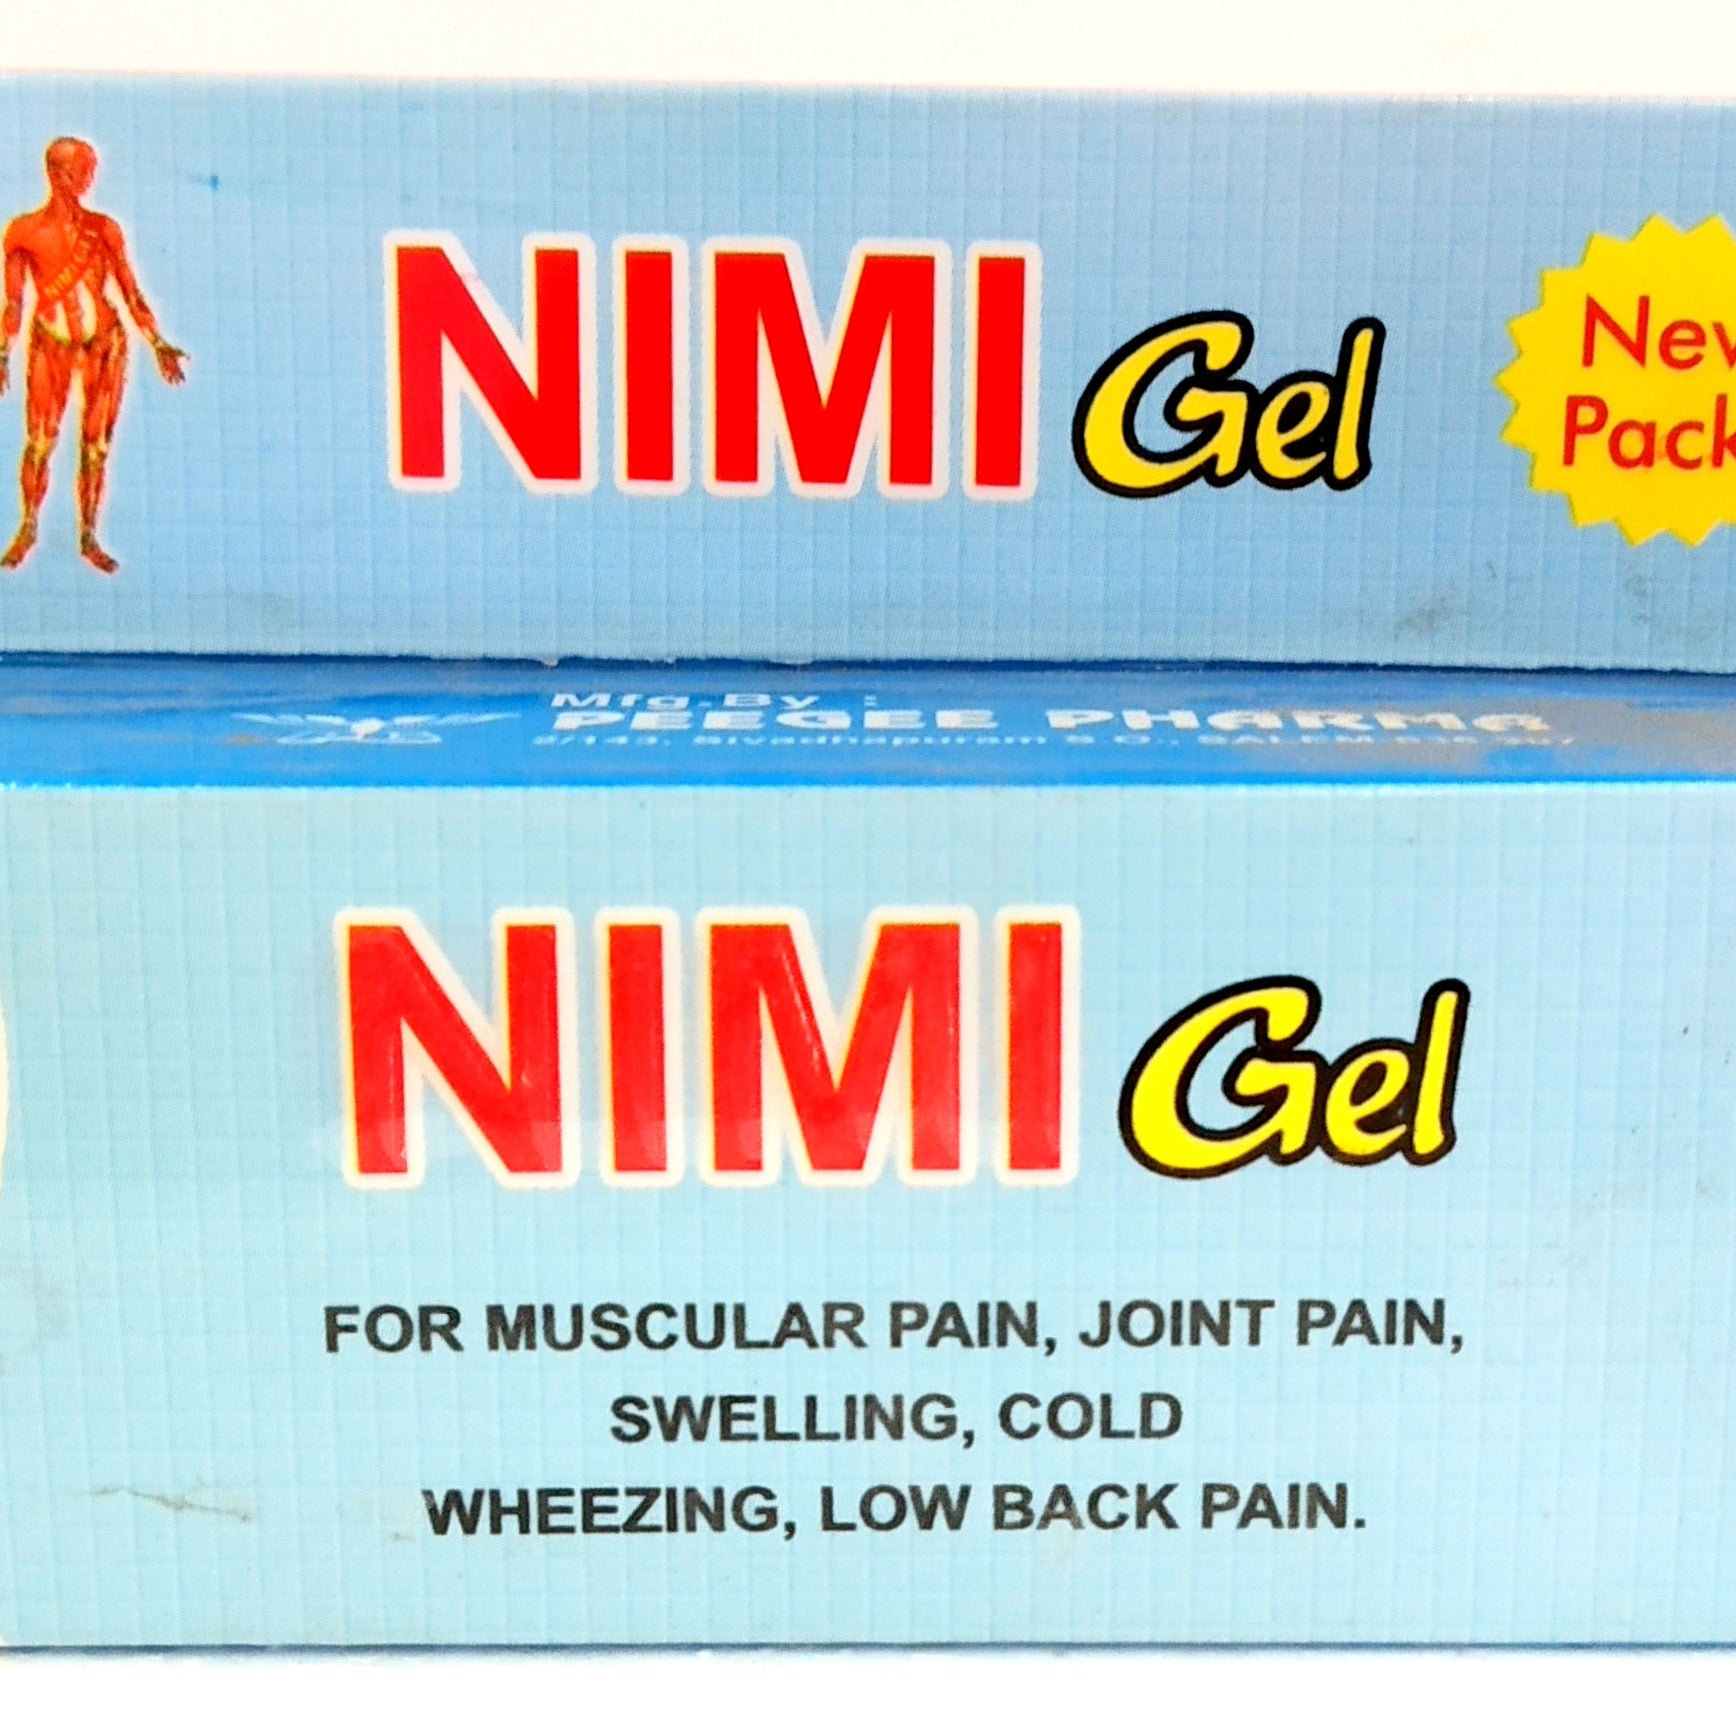 Shop Nimi Gel 15gm at price 41.00 from Peegee Online - Ayush Care